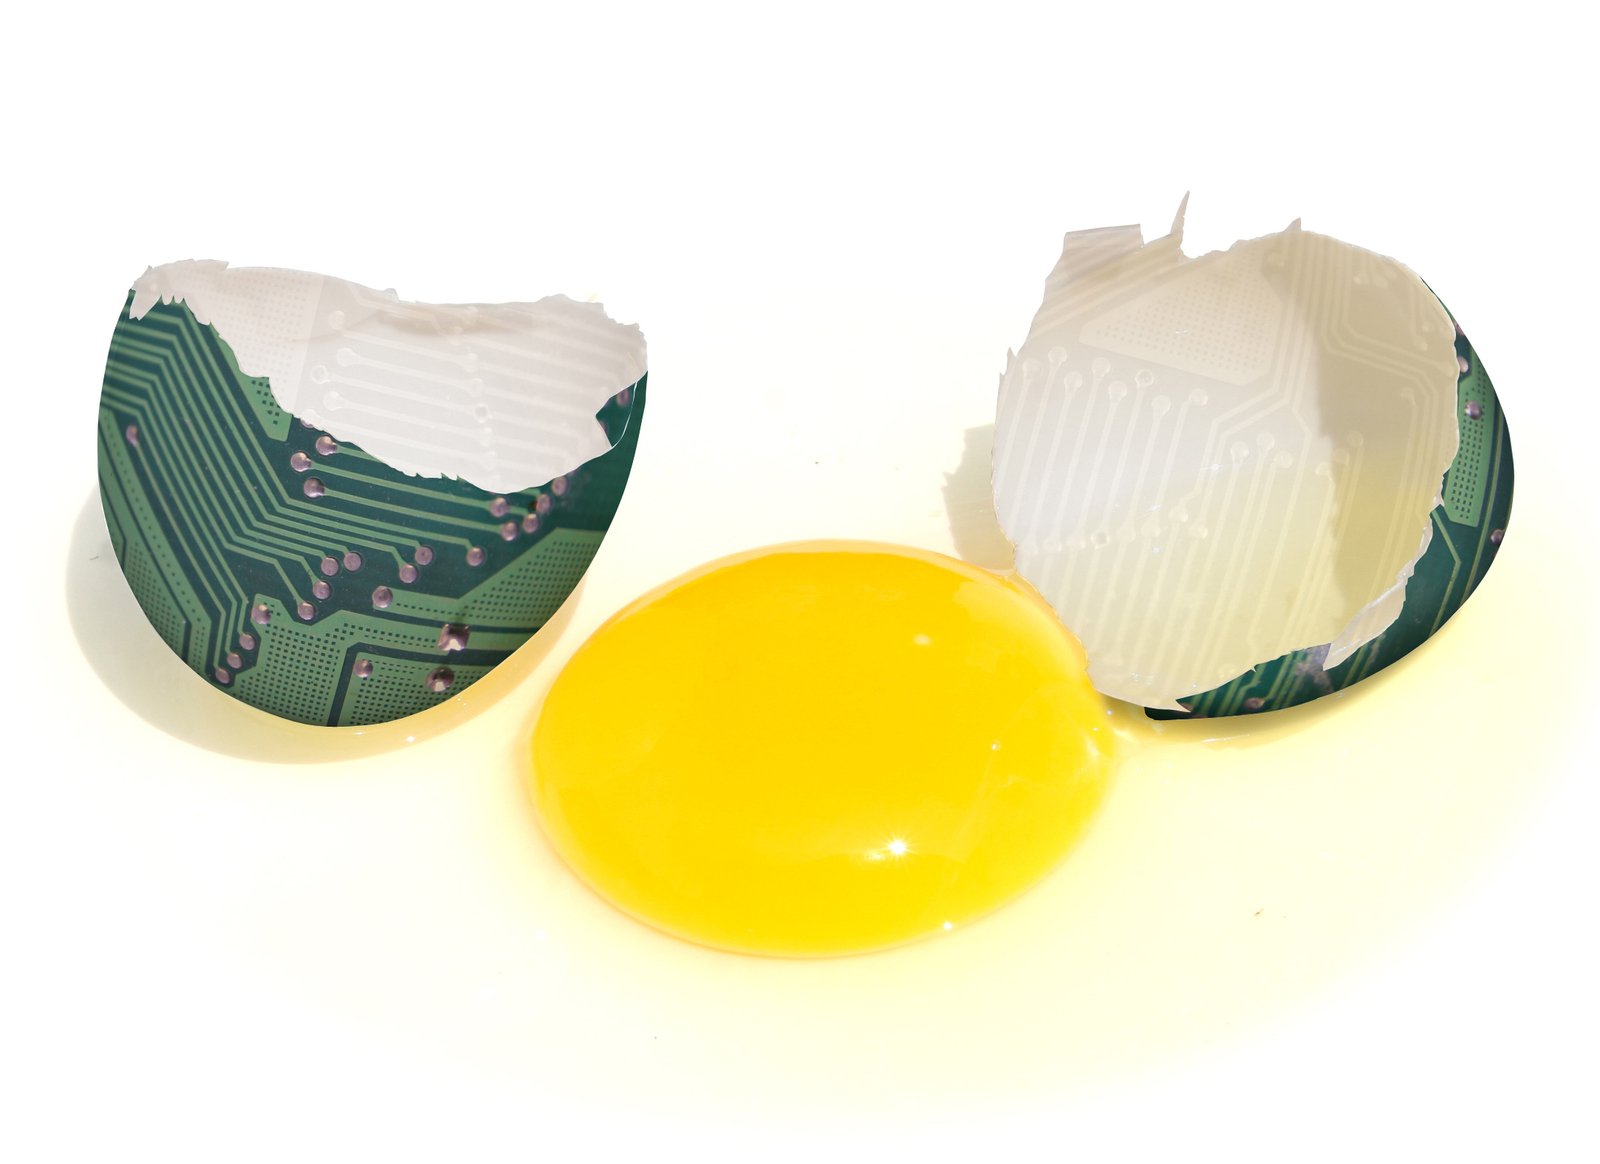 two ed eggs sitting side by side on a white surface